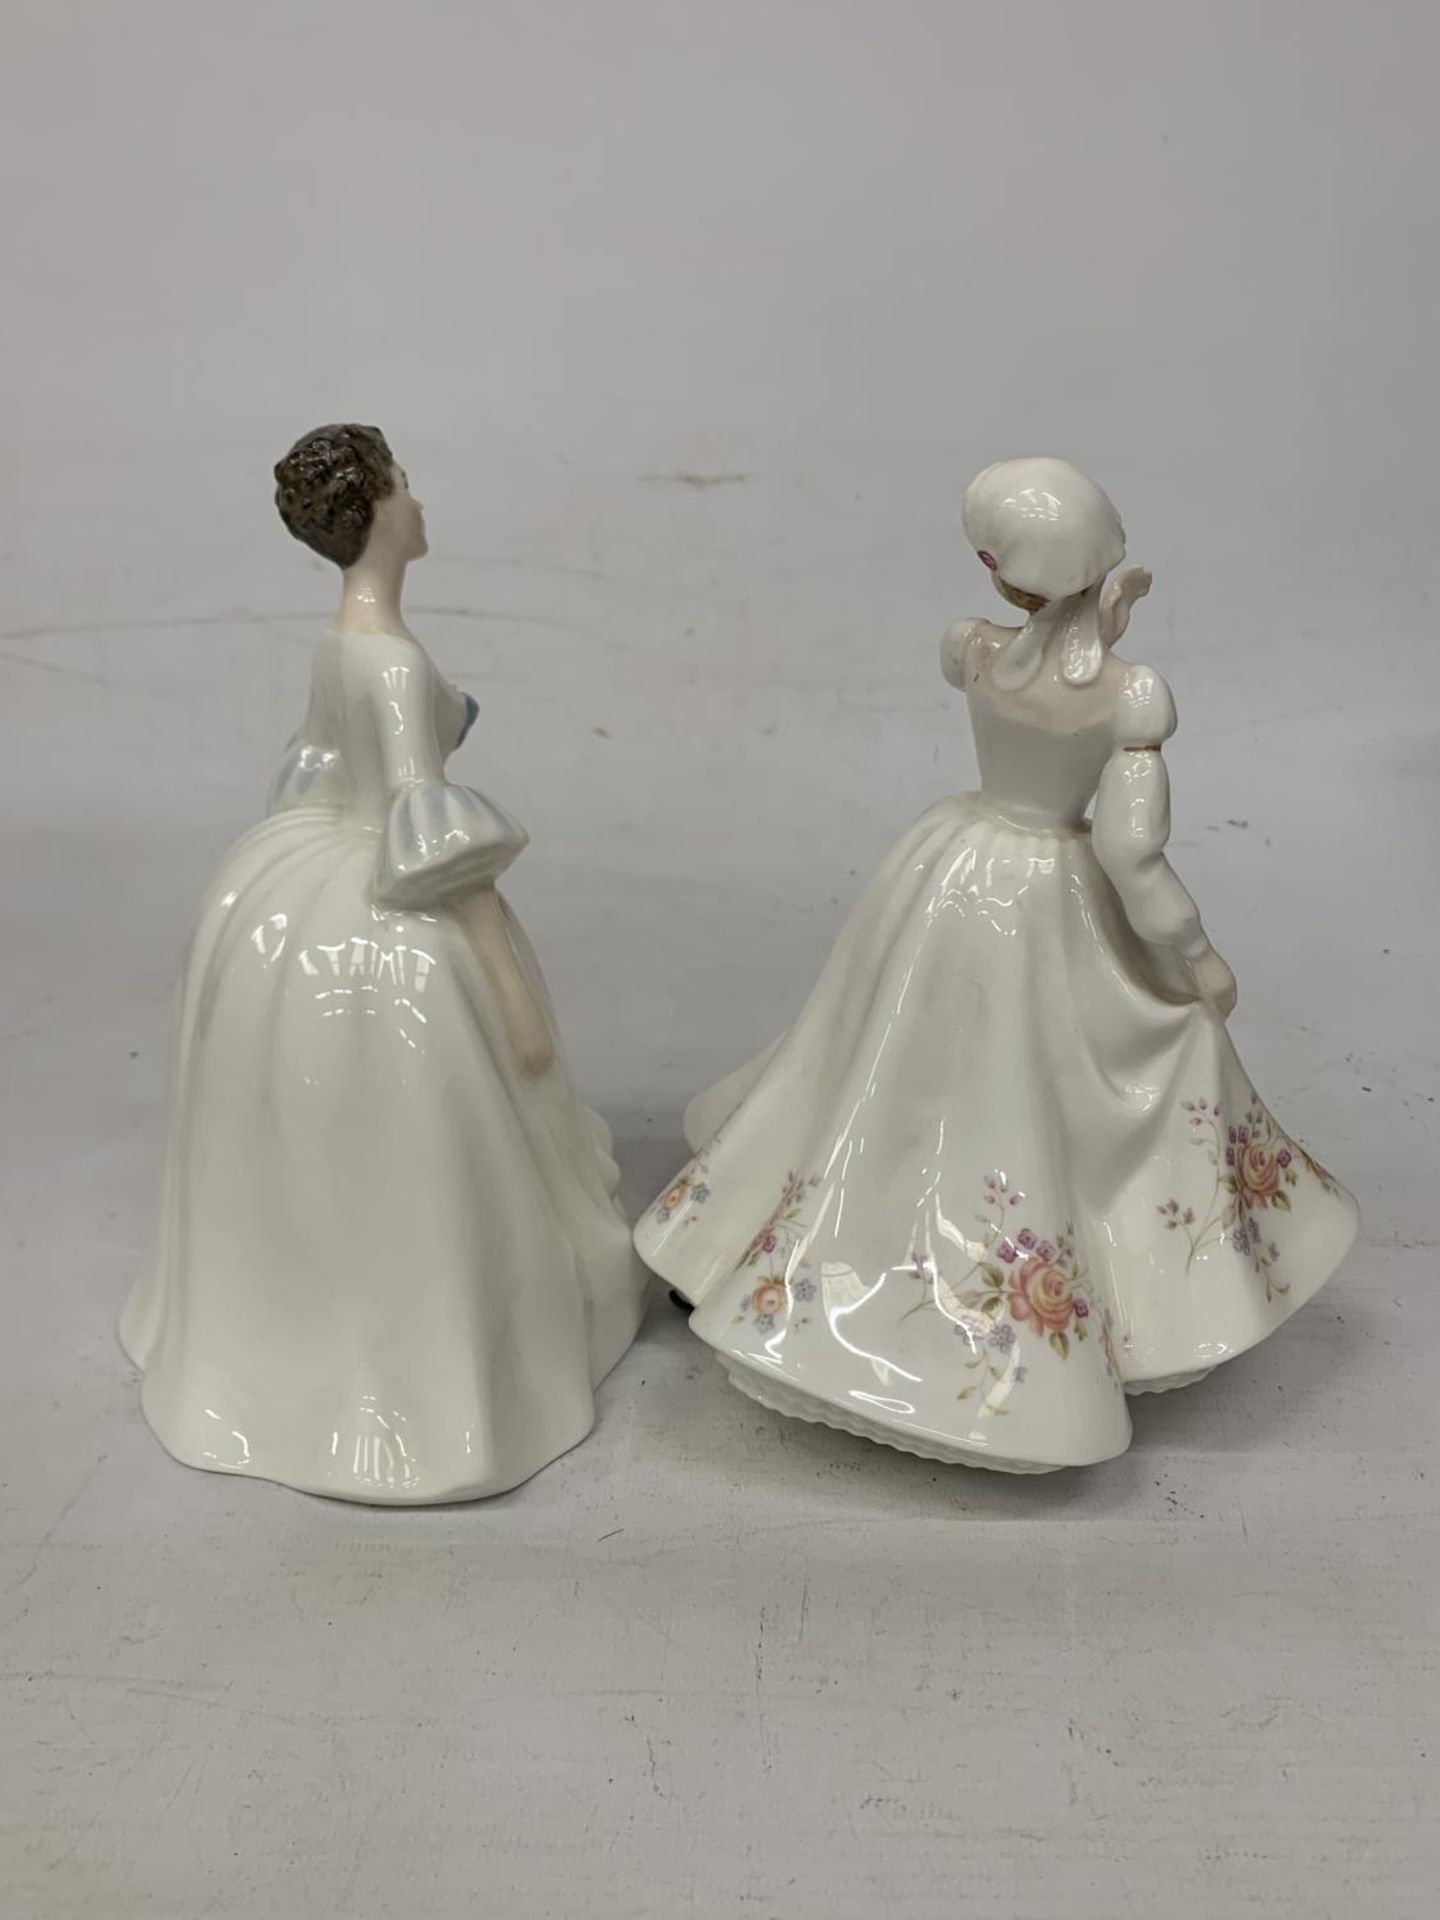 TWO ROYAL DOULTON FIGURES "ROSEMARY" HN 3143 AND "KELLY" HN 3222 - Image 2 of 4